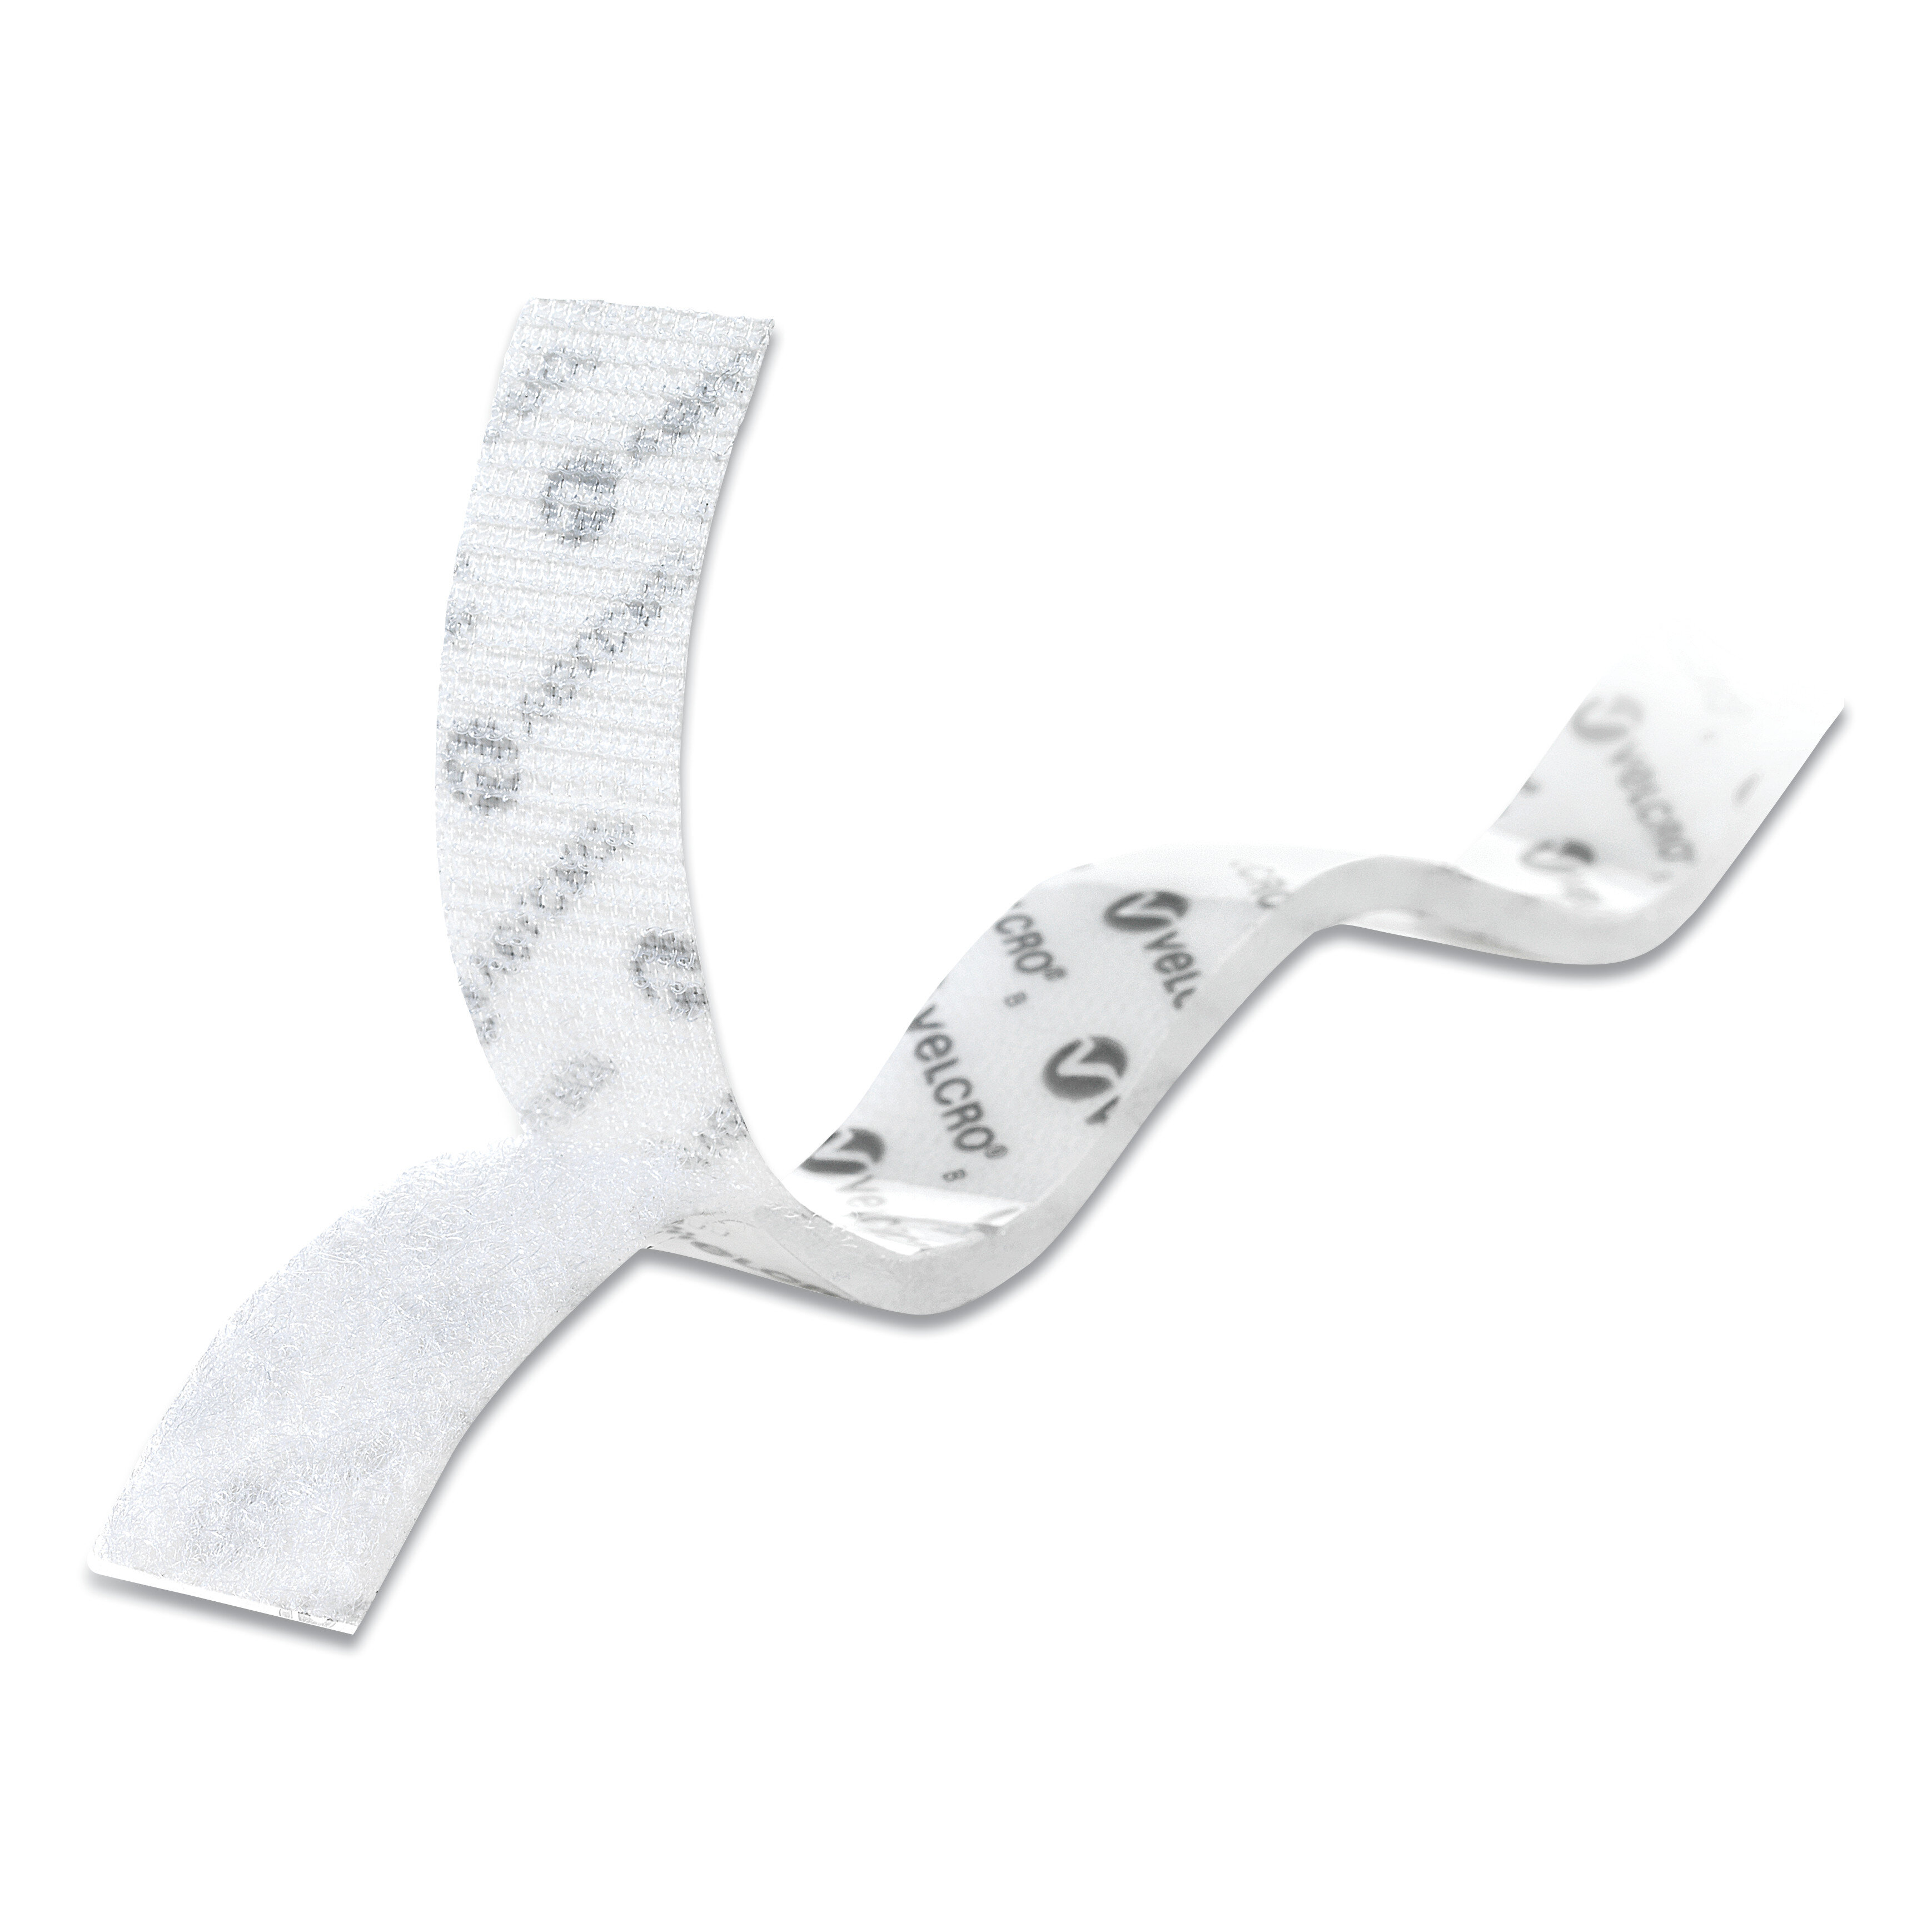 3M velcro 2 foot male sticky side non adhesive velcro strip